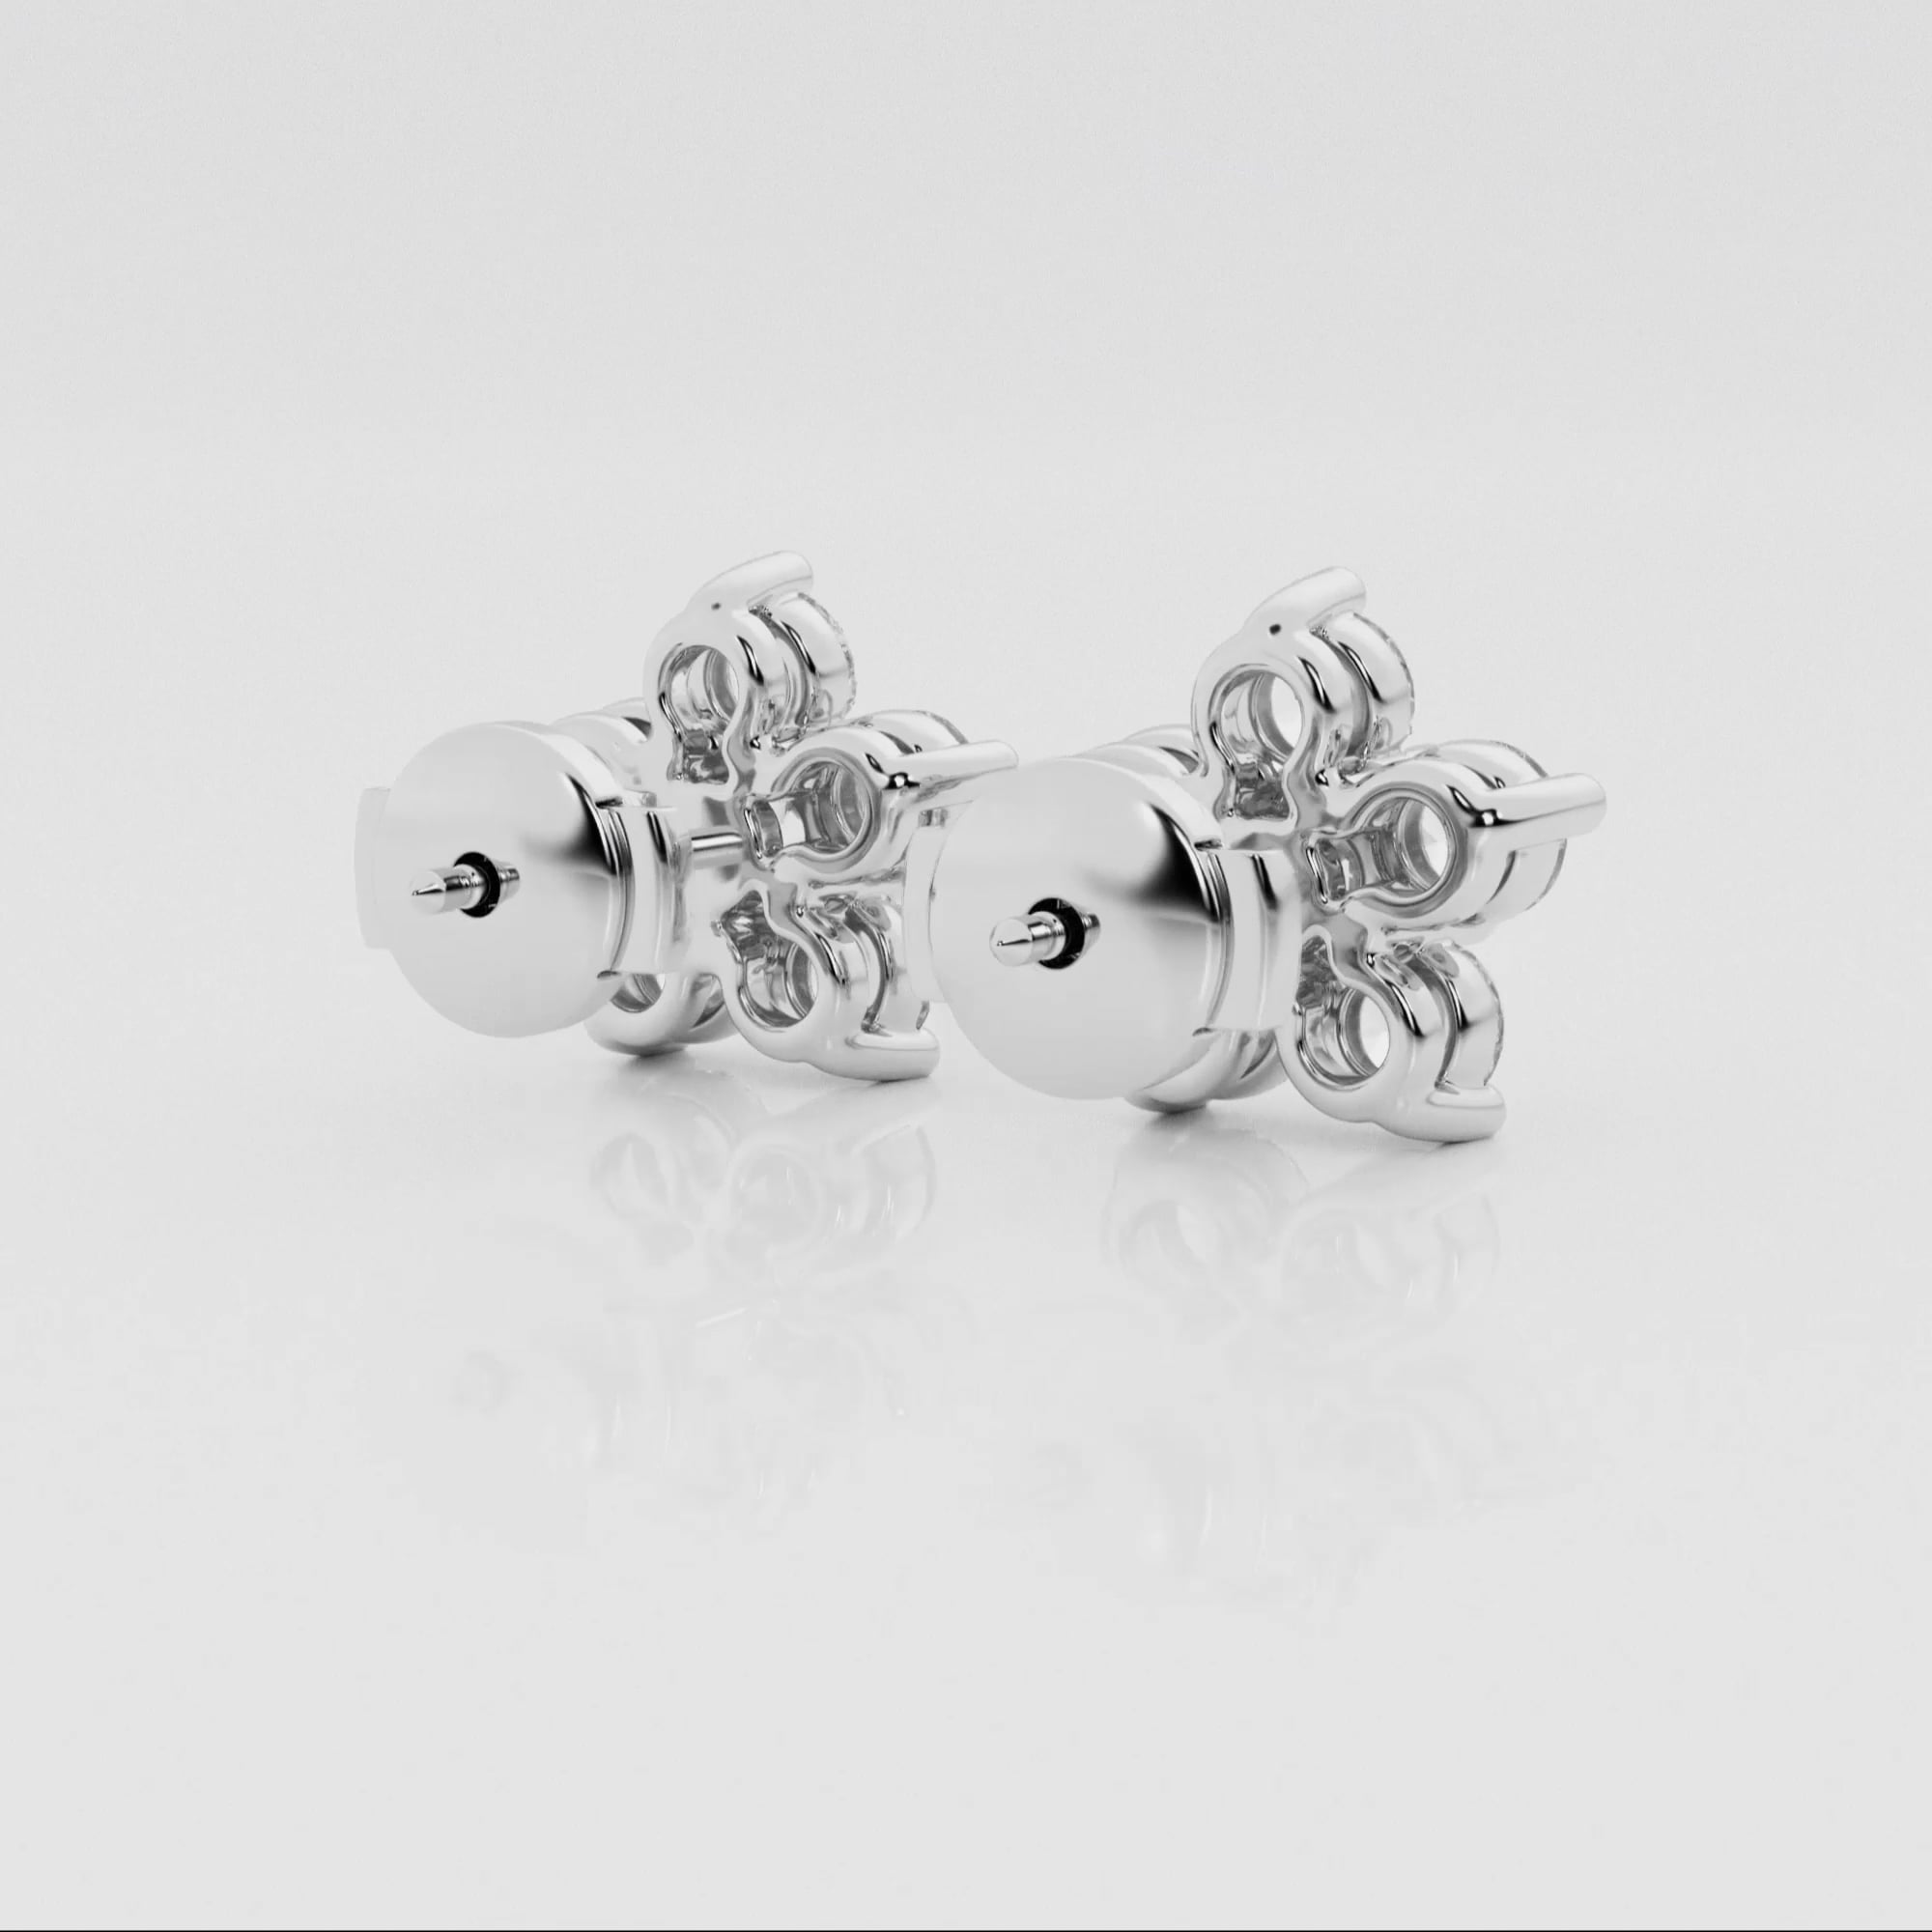 product video for 1 1/2 ctw Round Lab Grown Diamond Flower Stud Earrings